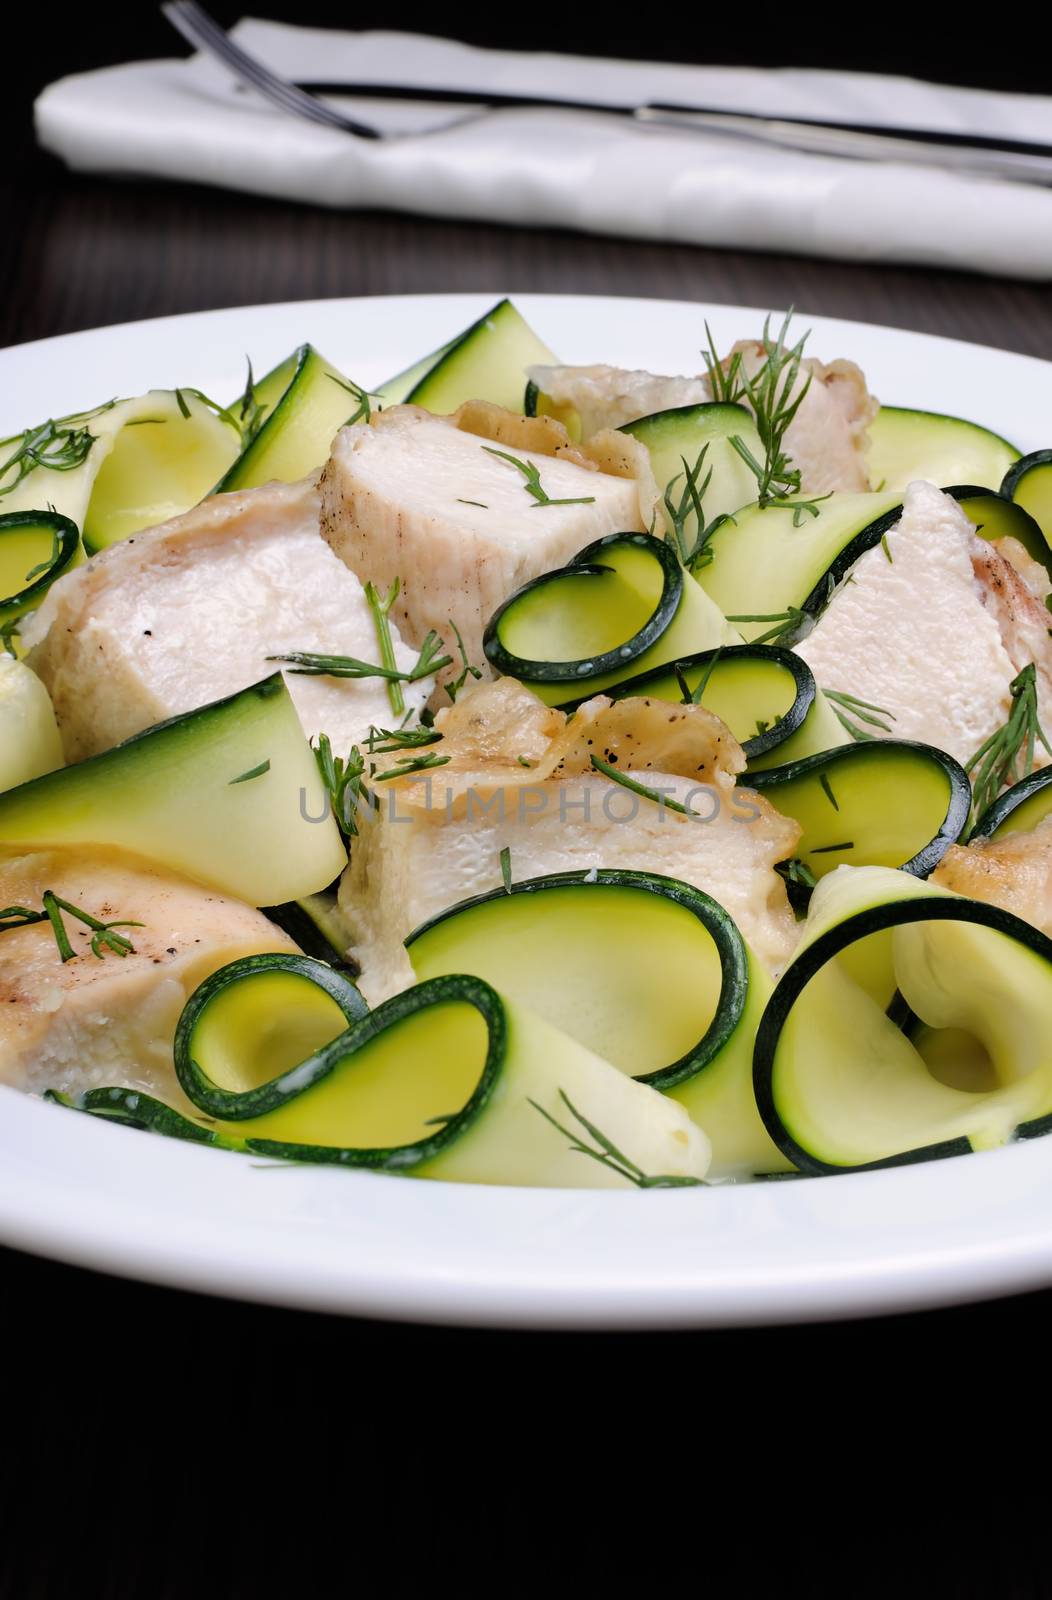 Ribbons of zucchini with slices of chicken in milk sauce